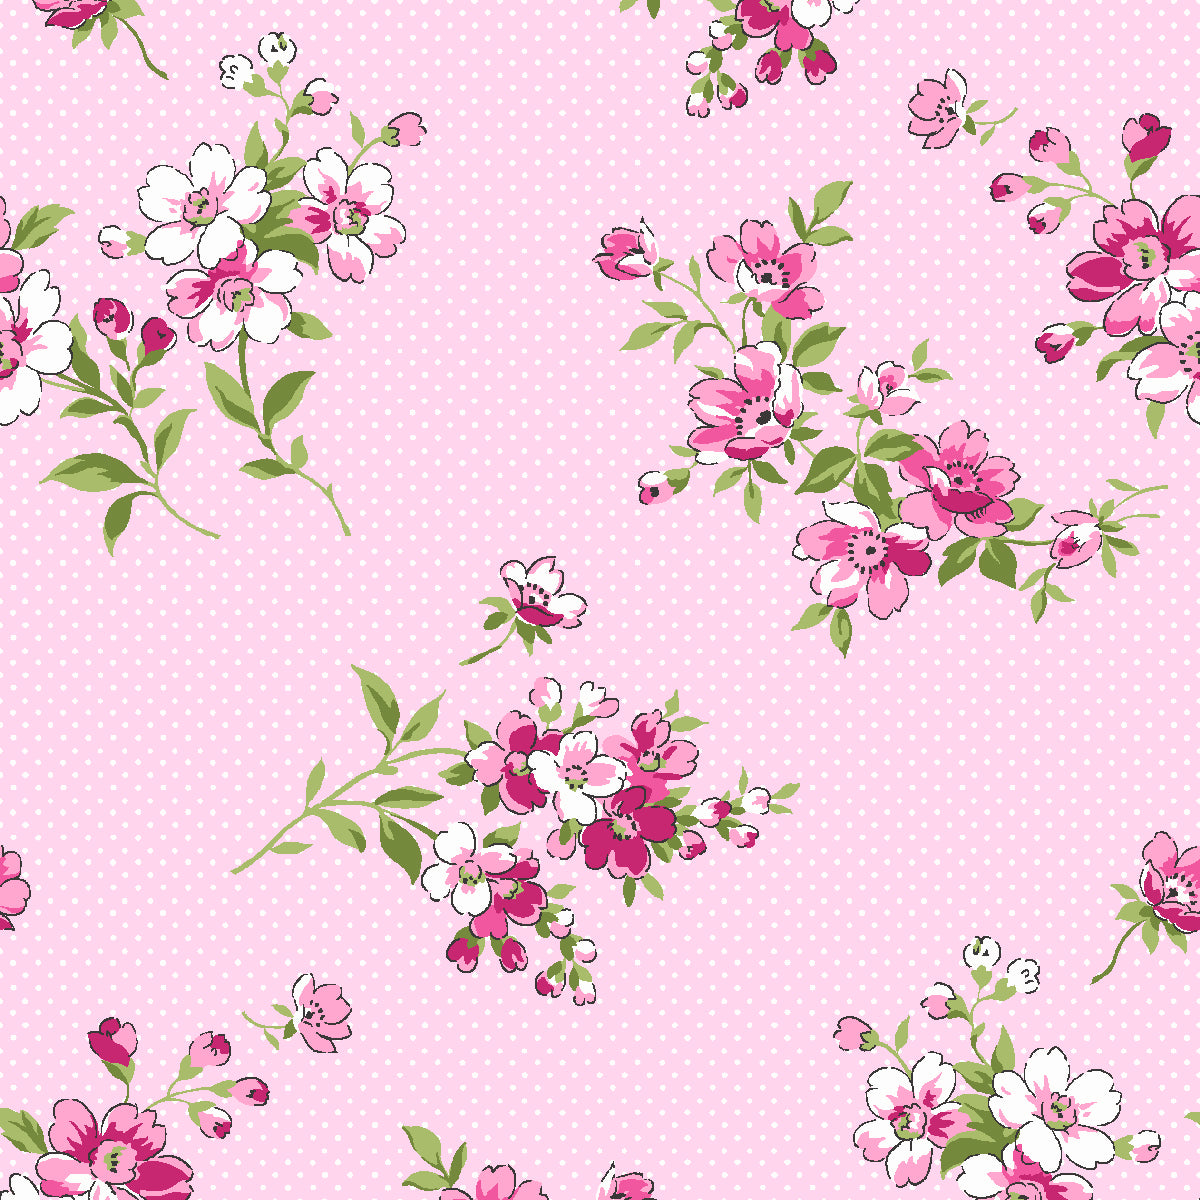 Waverly Inspirations Cotton 44" Small Floral Carnation Color Sewing Fabric by the Yard